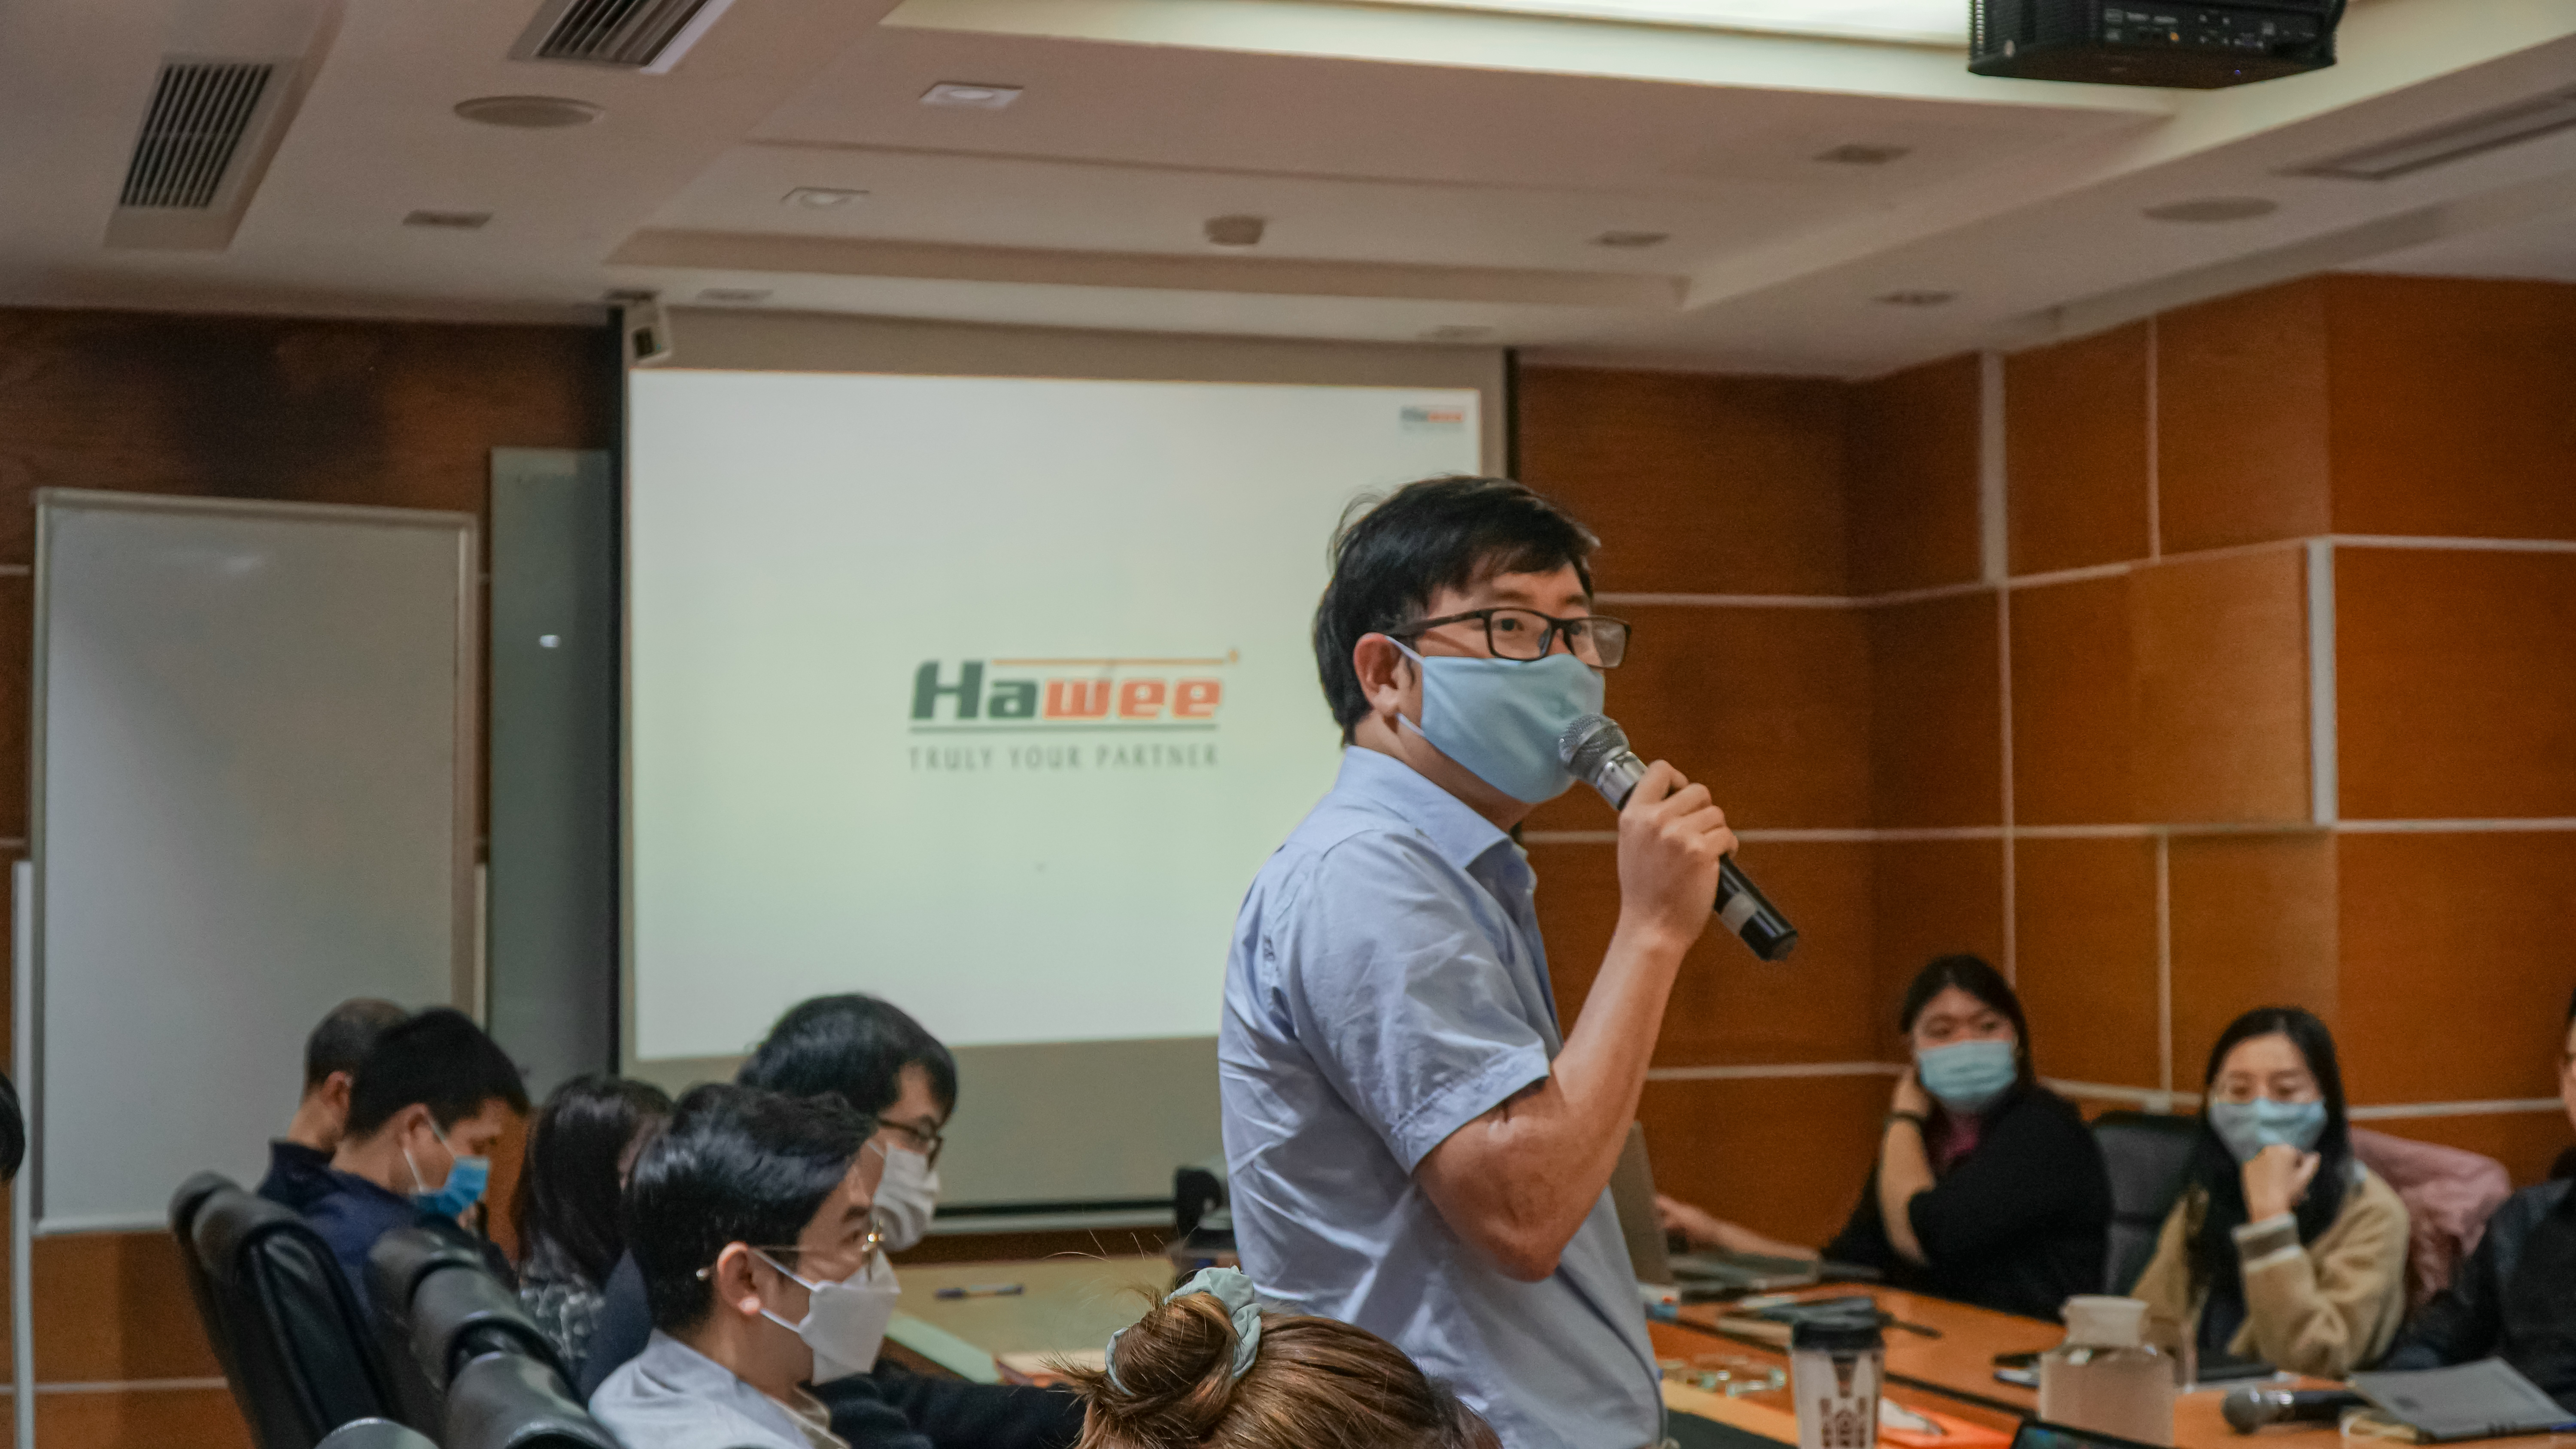 Hawee energy trains knowledge about waste electricity technology